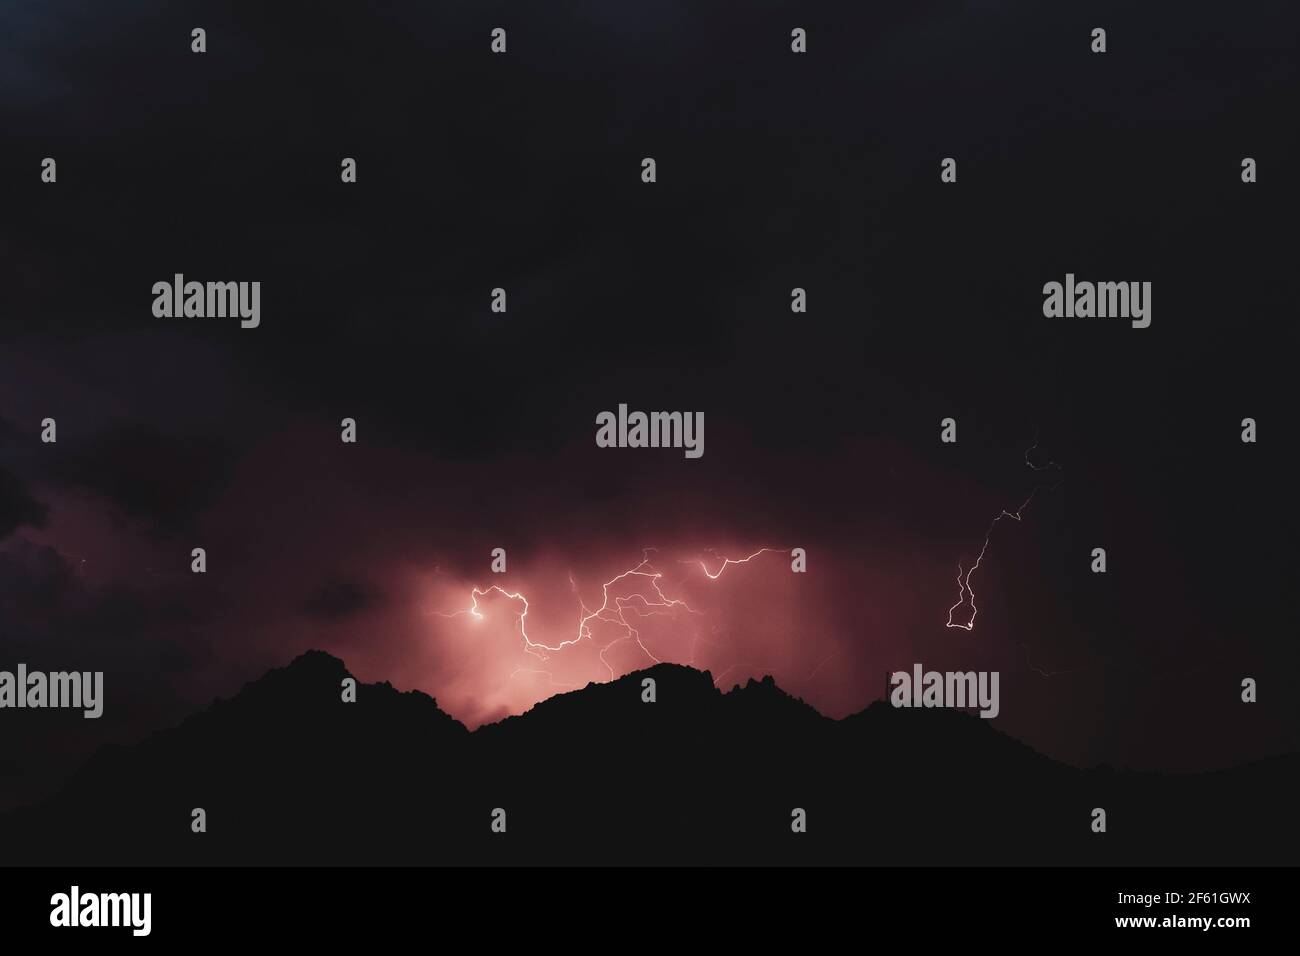 Thunderstorm in a mountain at night. Stock Photo